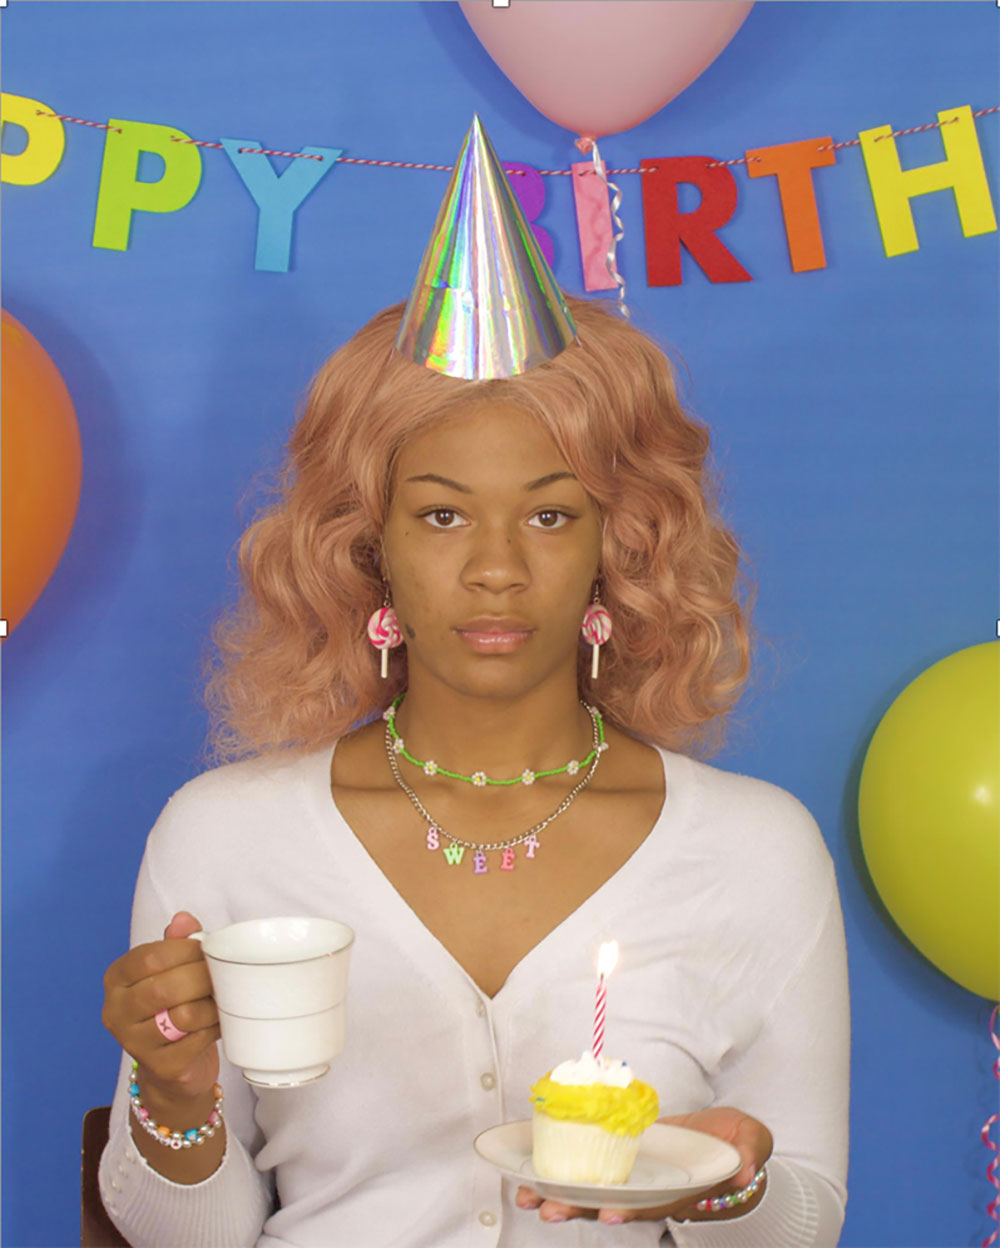 An image of a girl at a birthday party with a cupcake, tea, and a party hat - but is not smiling. 